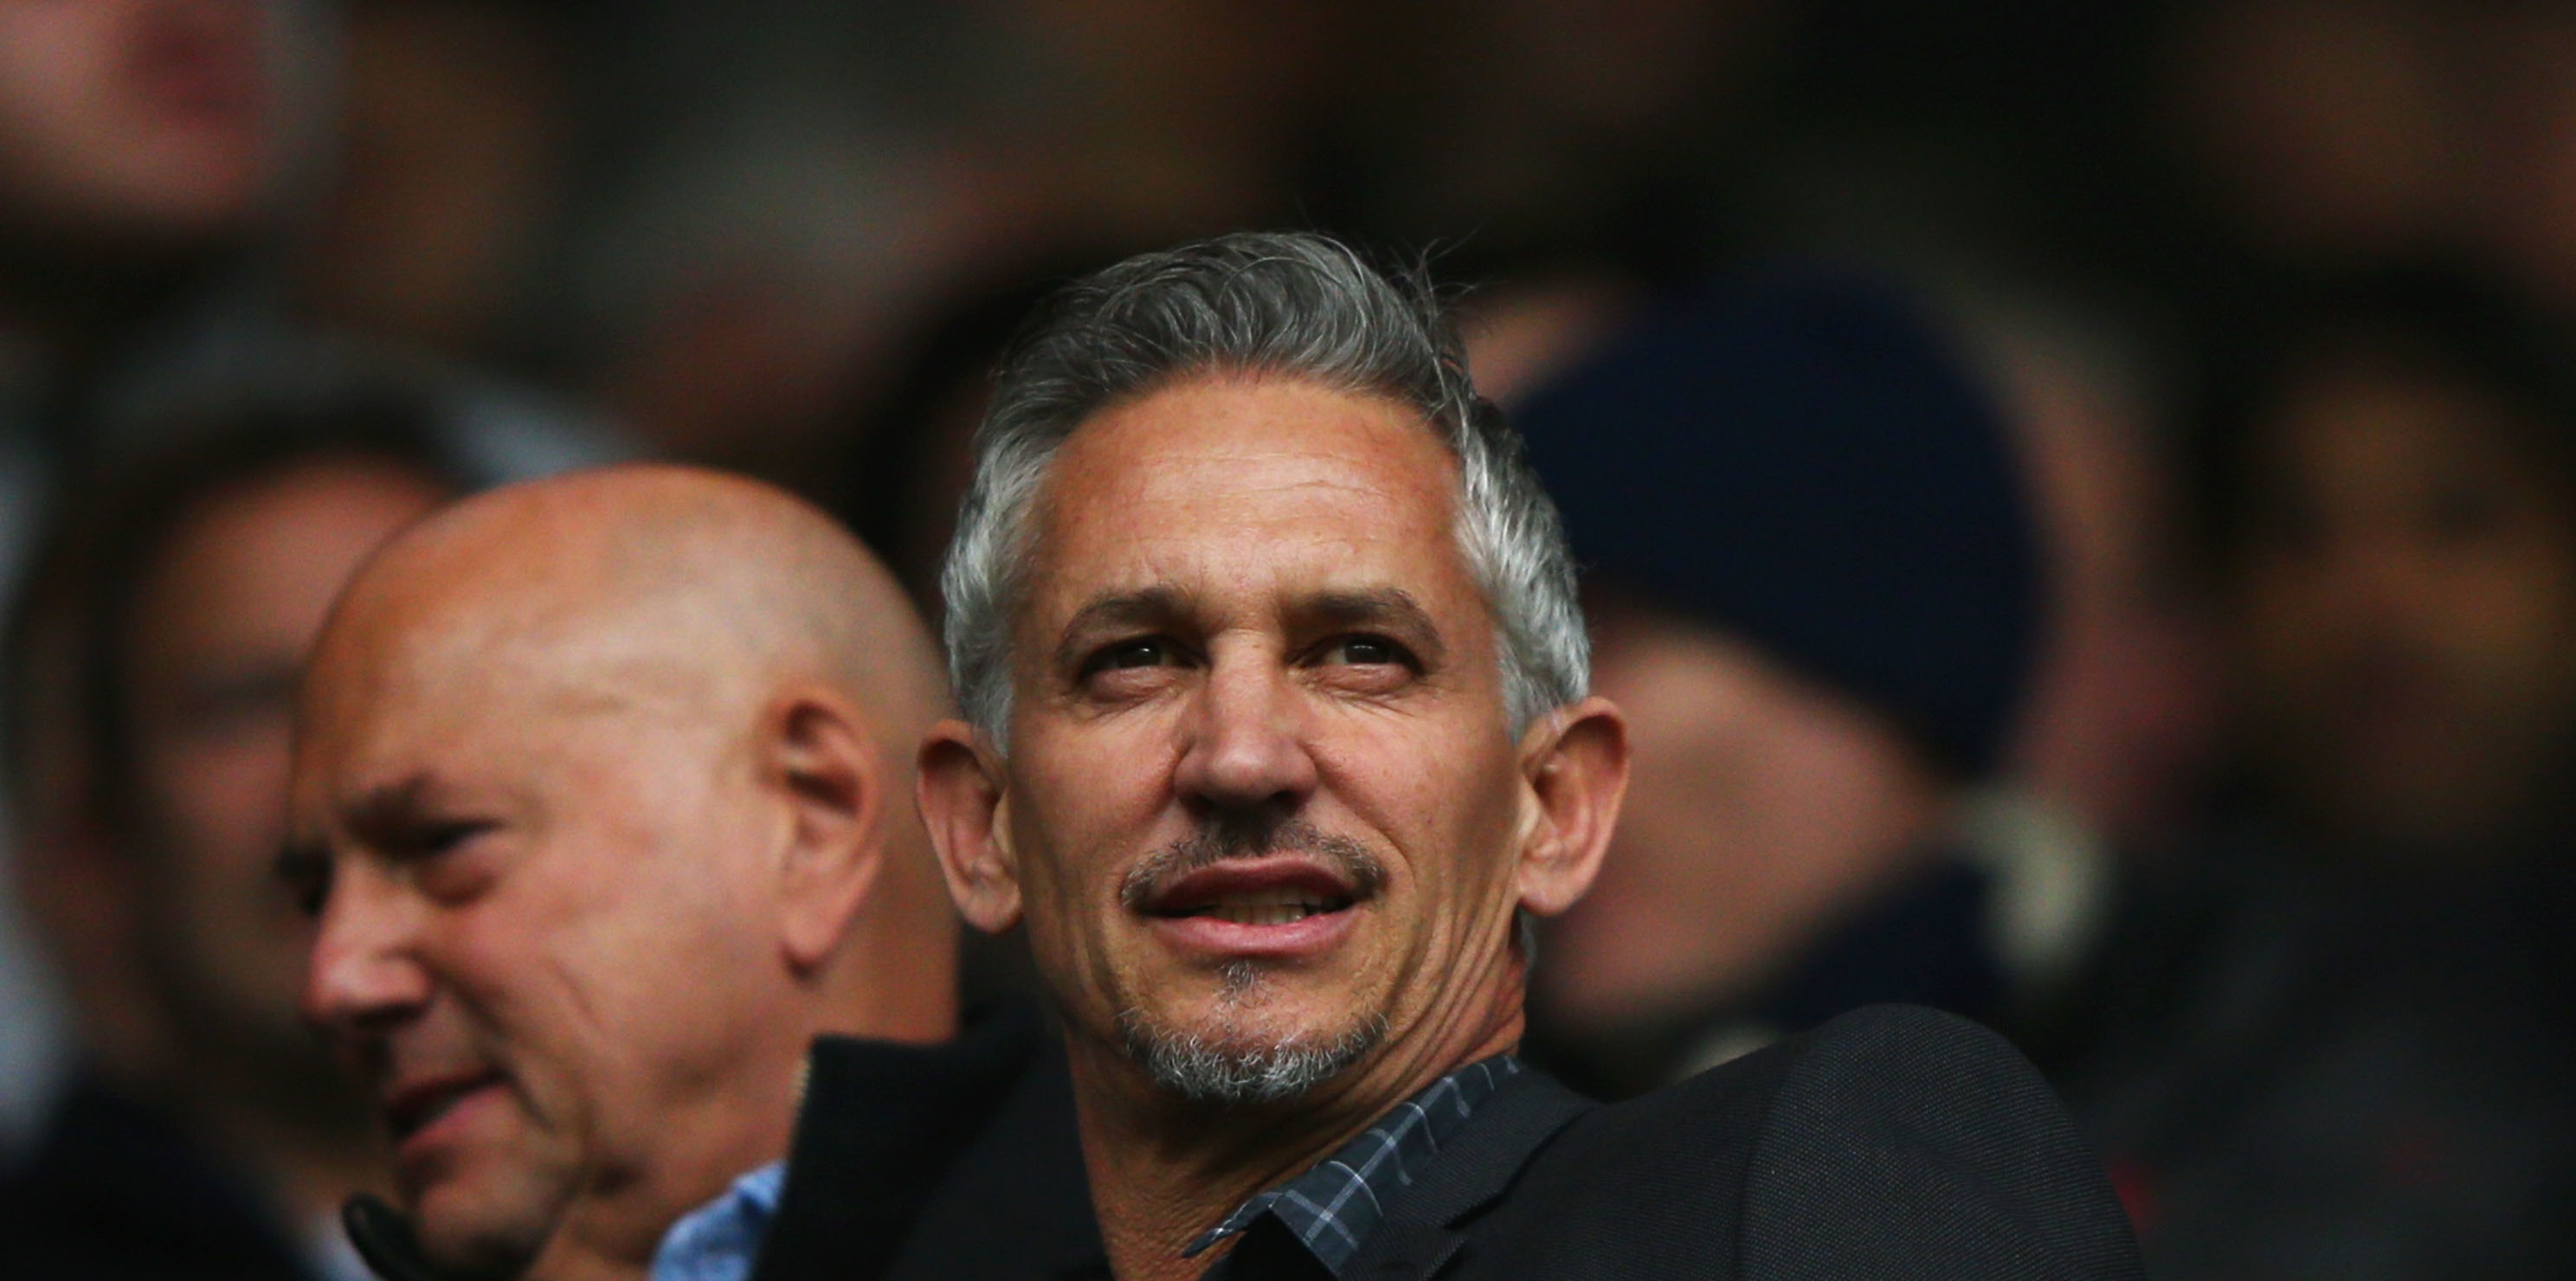 Gary Lineker praises Jurgen Klopp and discusses Sadio Mane’s Liverpool future with Bayern Munich yet to meet the Reds’ valuation for Senegal star